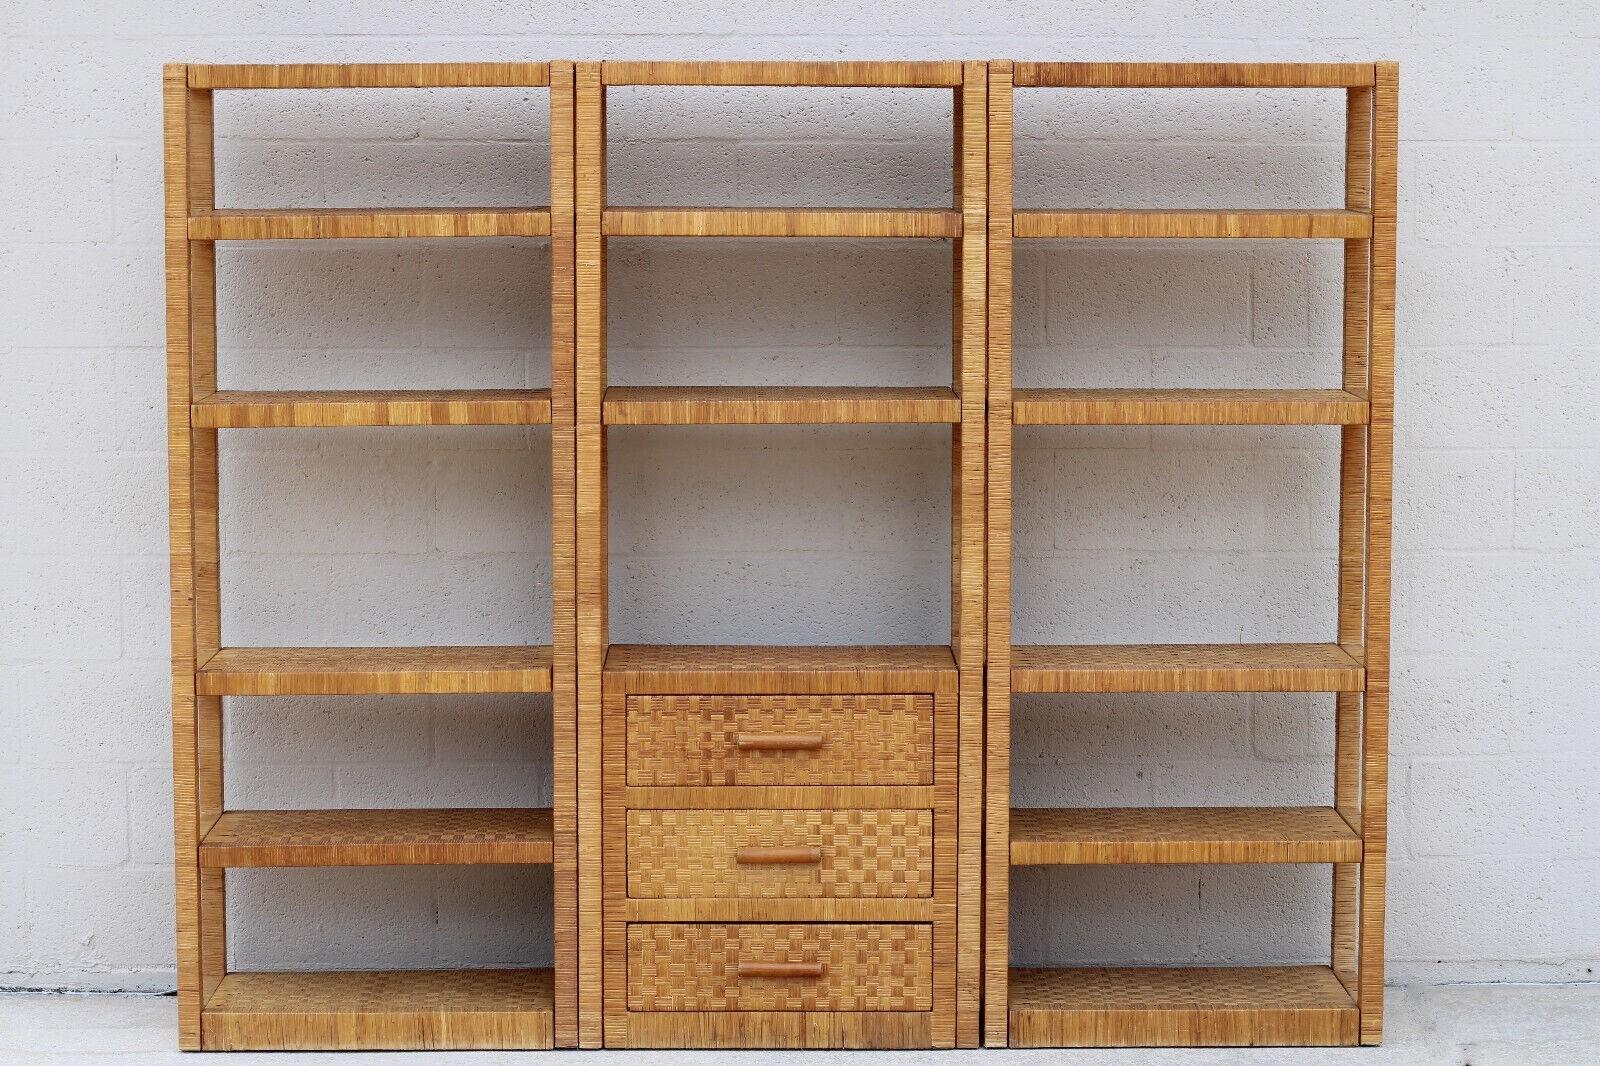 Vintage Billy Baldwin Style 3-Piece Wrapped Cane Etagere Wall Unit

Fabulous vintage 3-piece rattan wall unit features beautiful basketweave detail on drawer fronts and shelves. Expertly crafted with hand-wrapped rattan over hardwood construction.